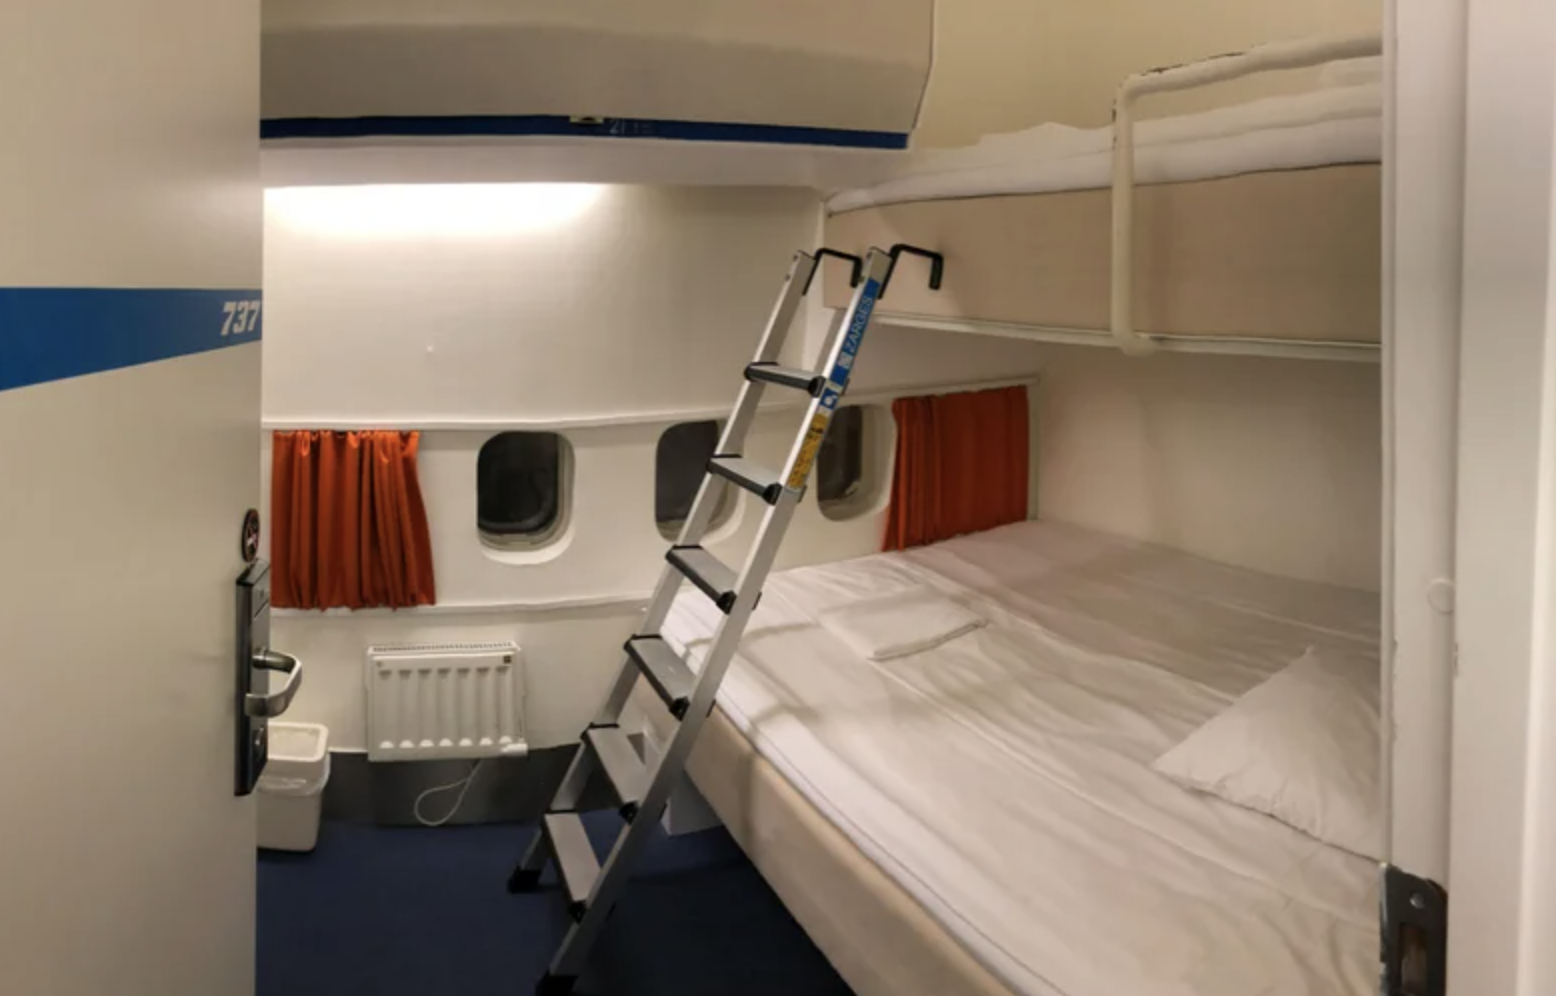 A plane converted into a hostel